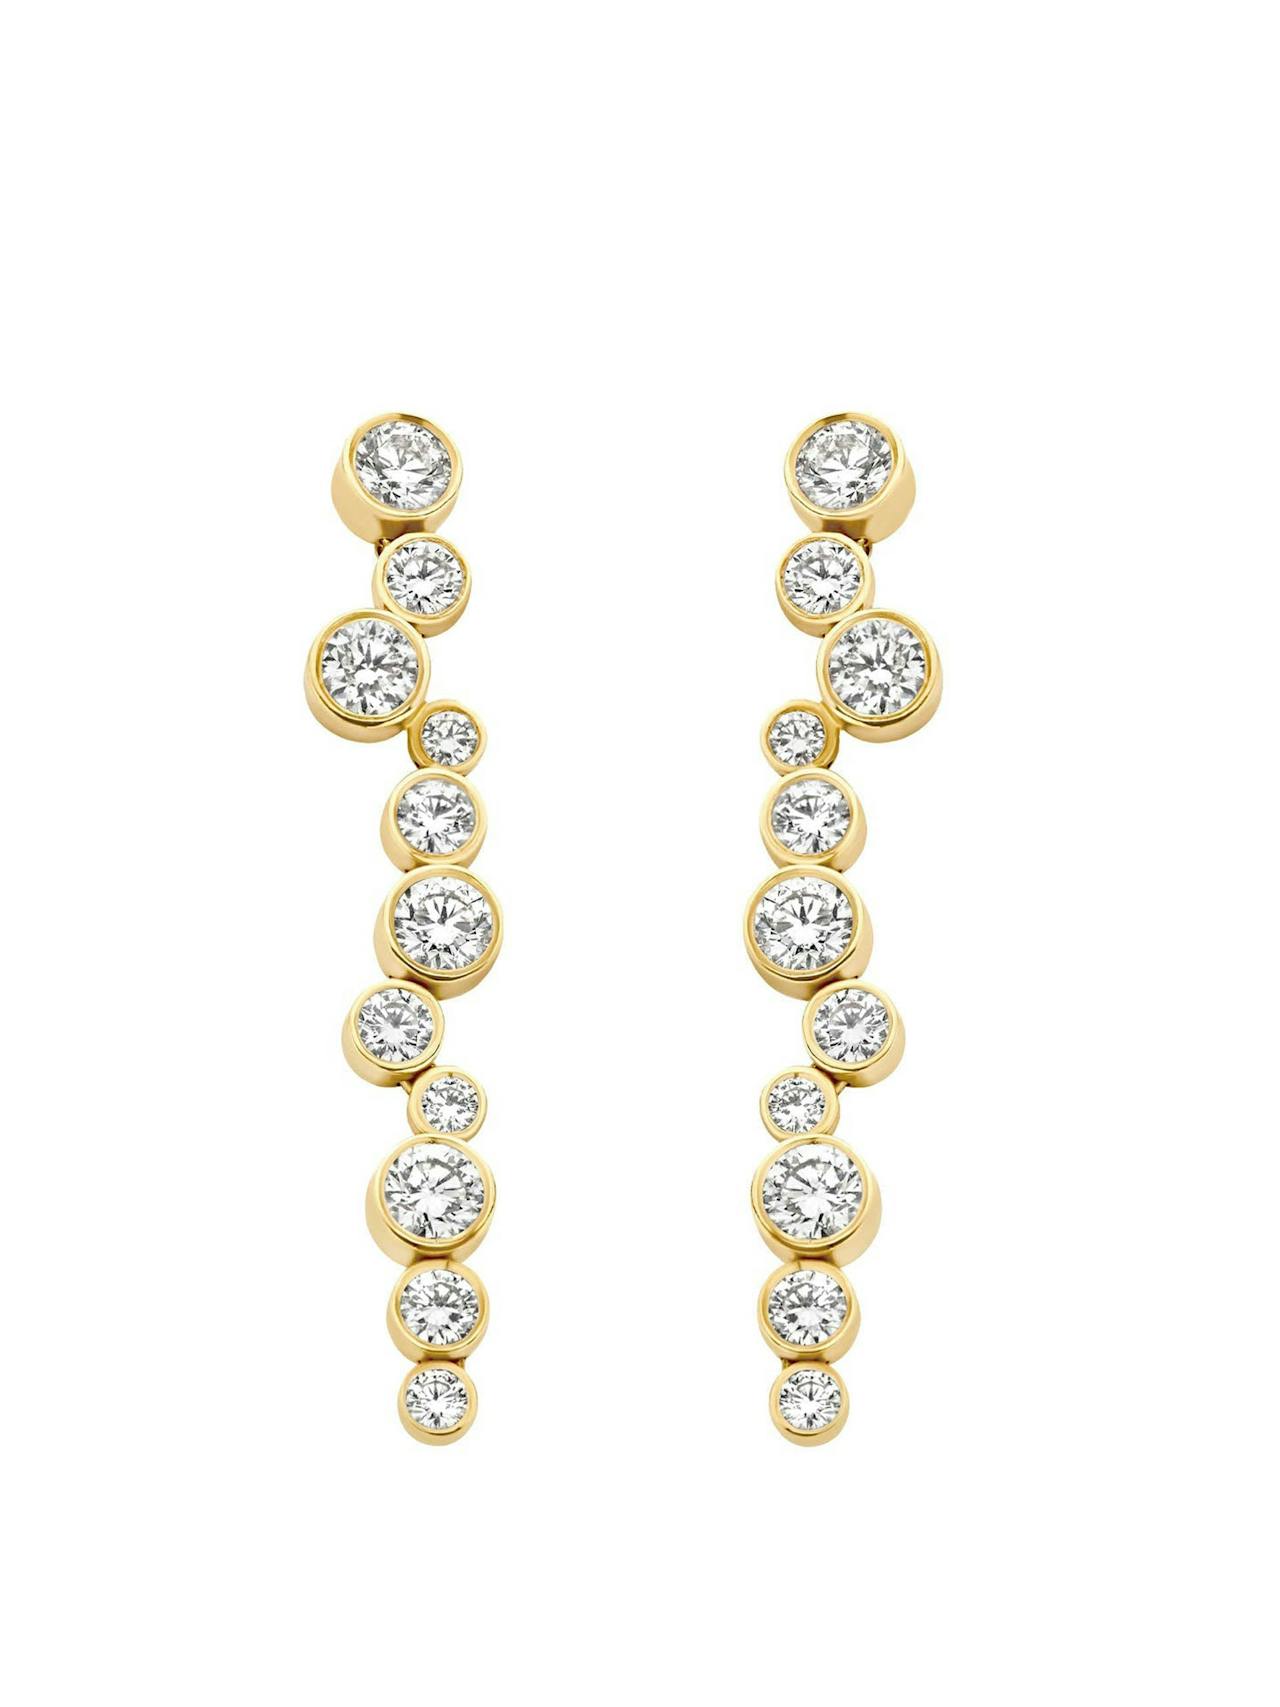 The Splendido Earrings embraces Kimai's bezel setting signature. Mobile, they move with its wearer.